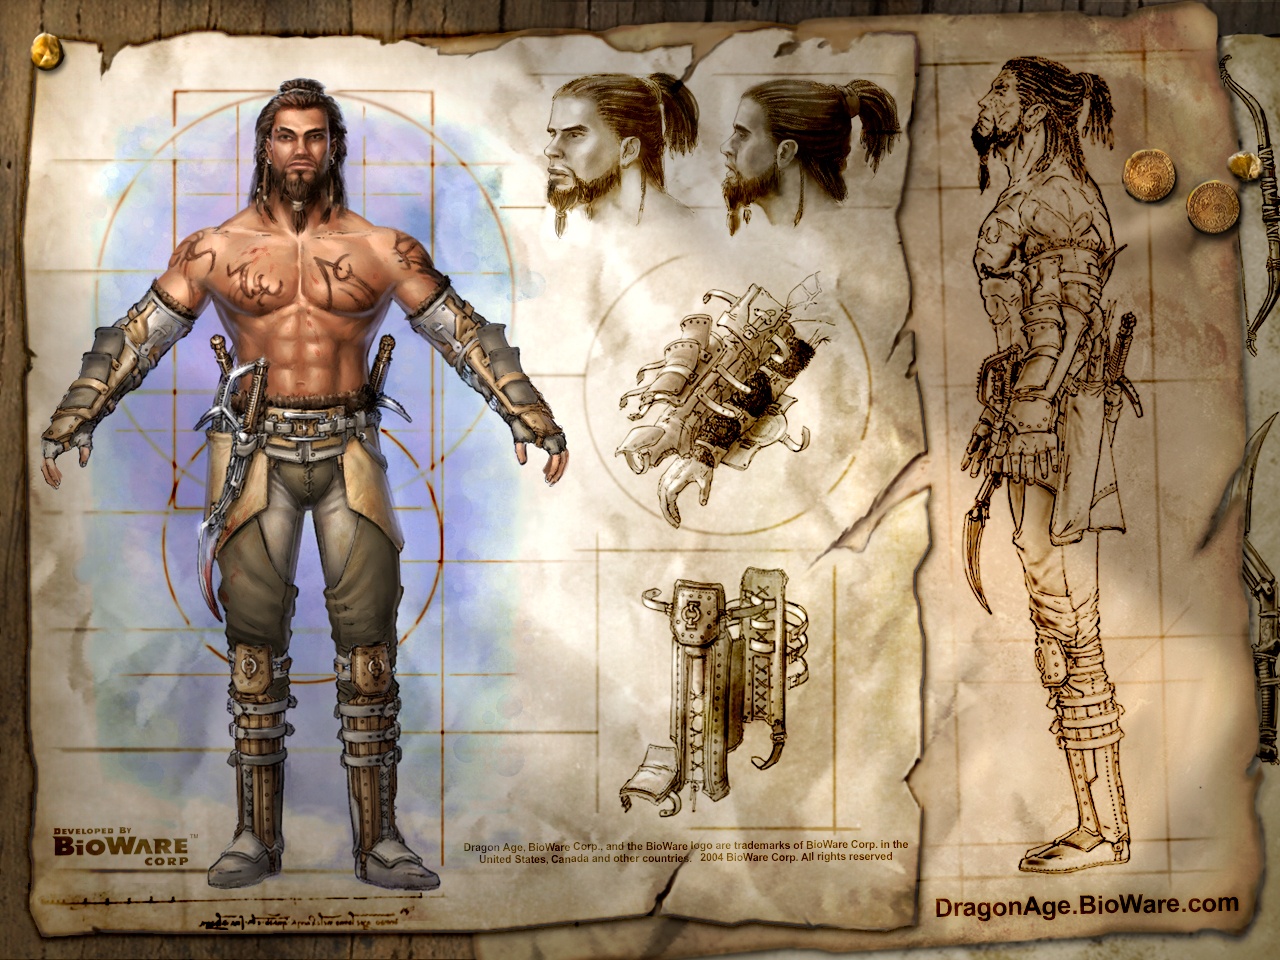 Concept art of a male character from an extremely early concept of Origins